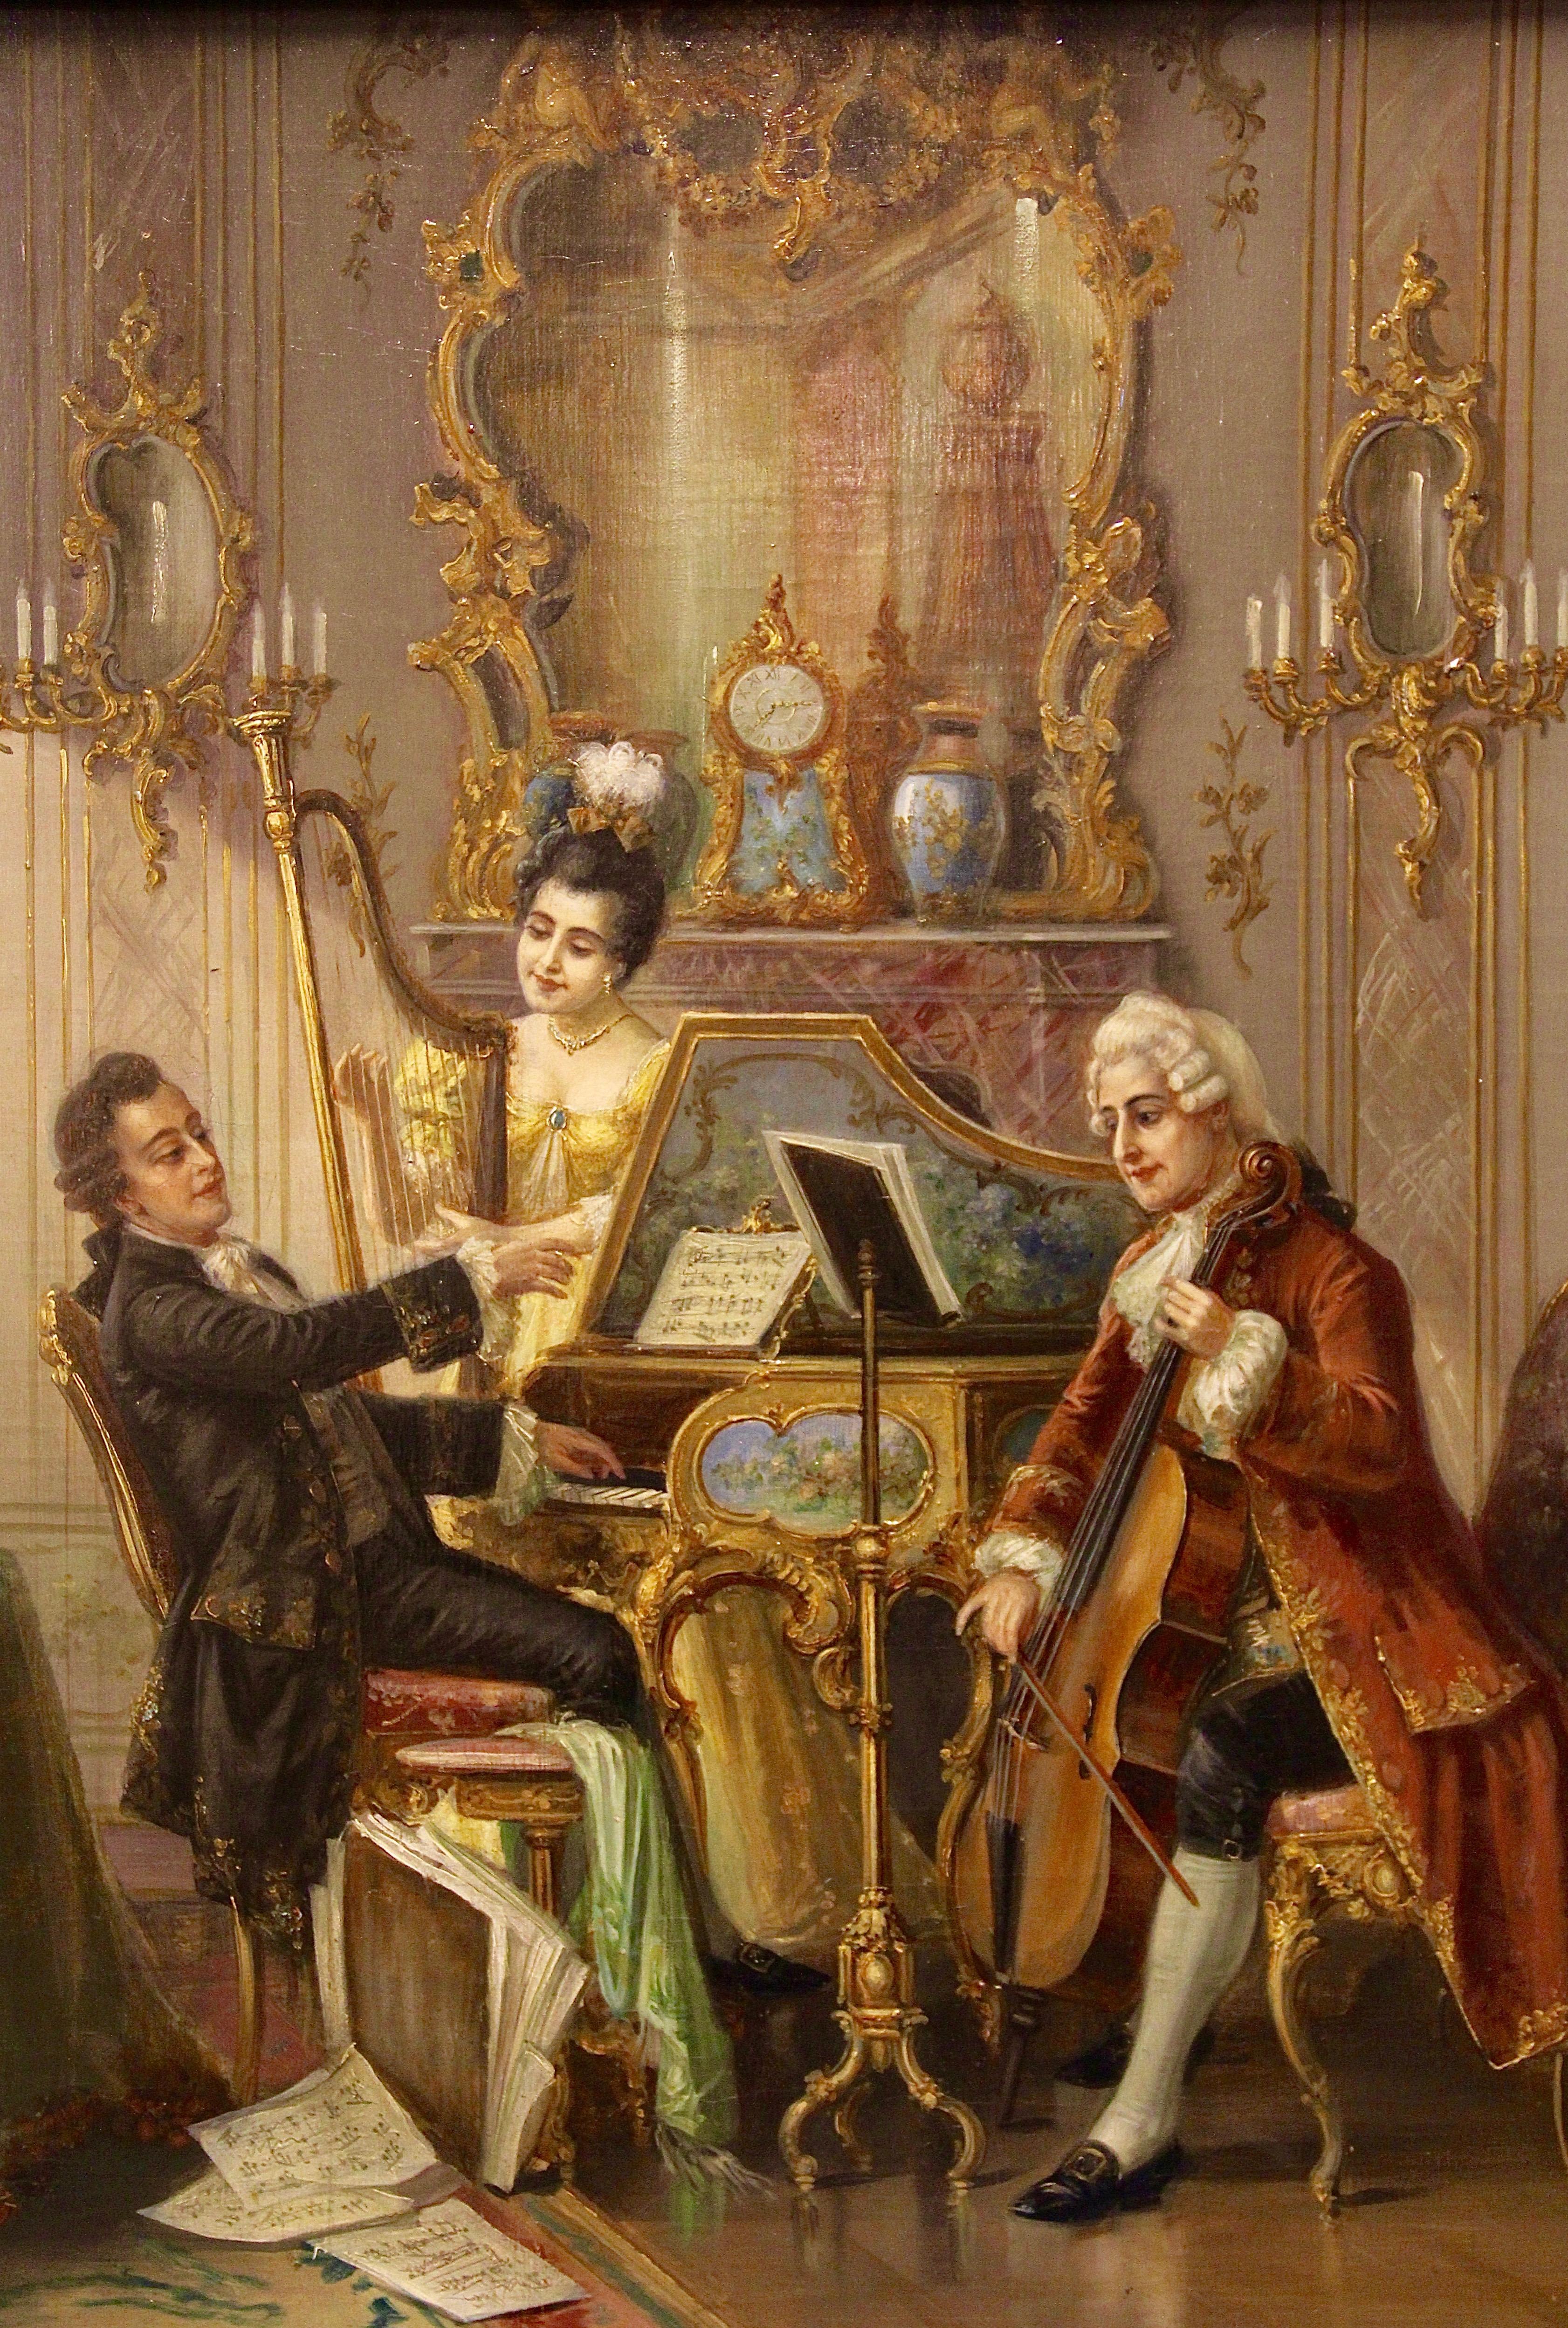 Beautiful, large and very decorative oil painting.
Oil on canvas. Signed lower left. H. Pinggera. (Heinz Pinggera)

Salon scene with playing trio and rich figures staffage in the costume of the Rococo.

The painting is very finely painted, down to